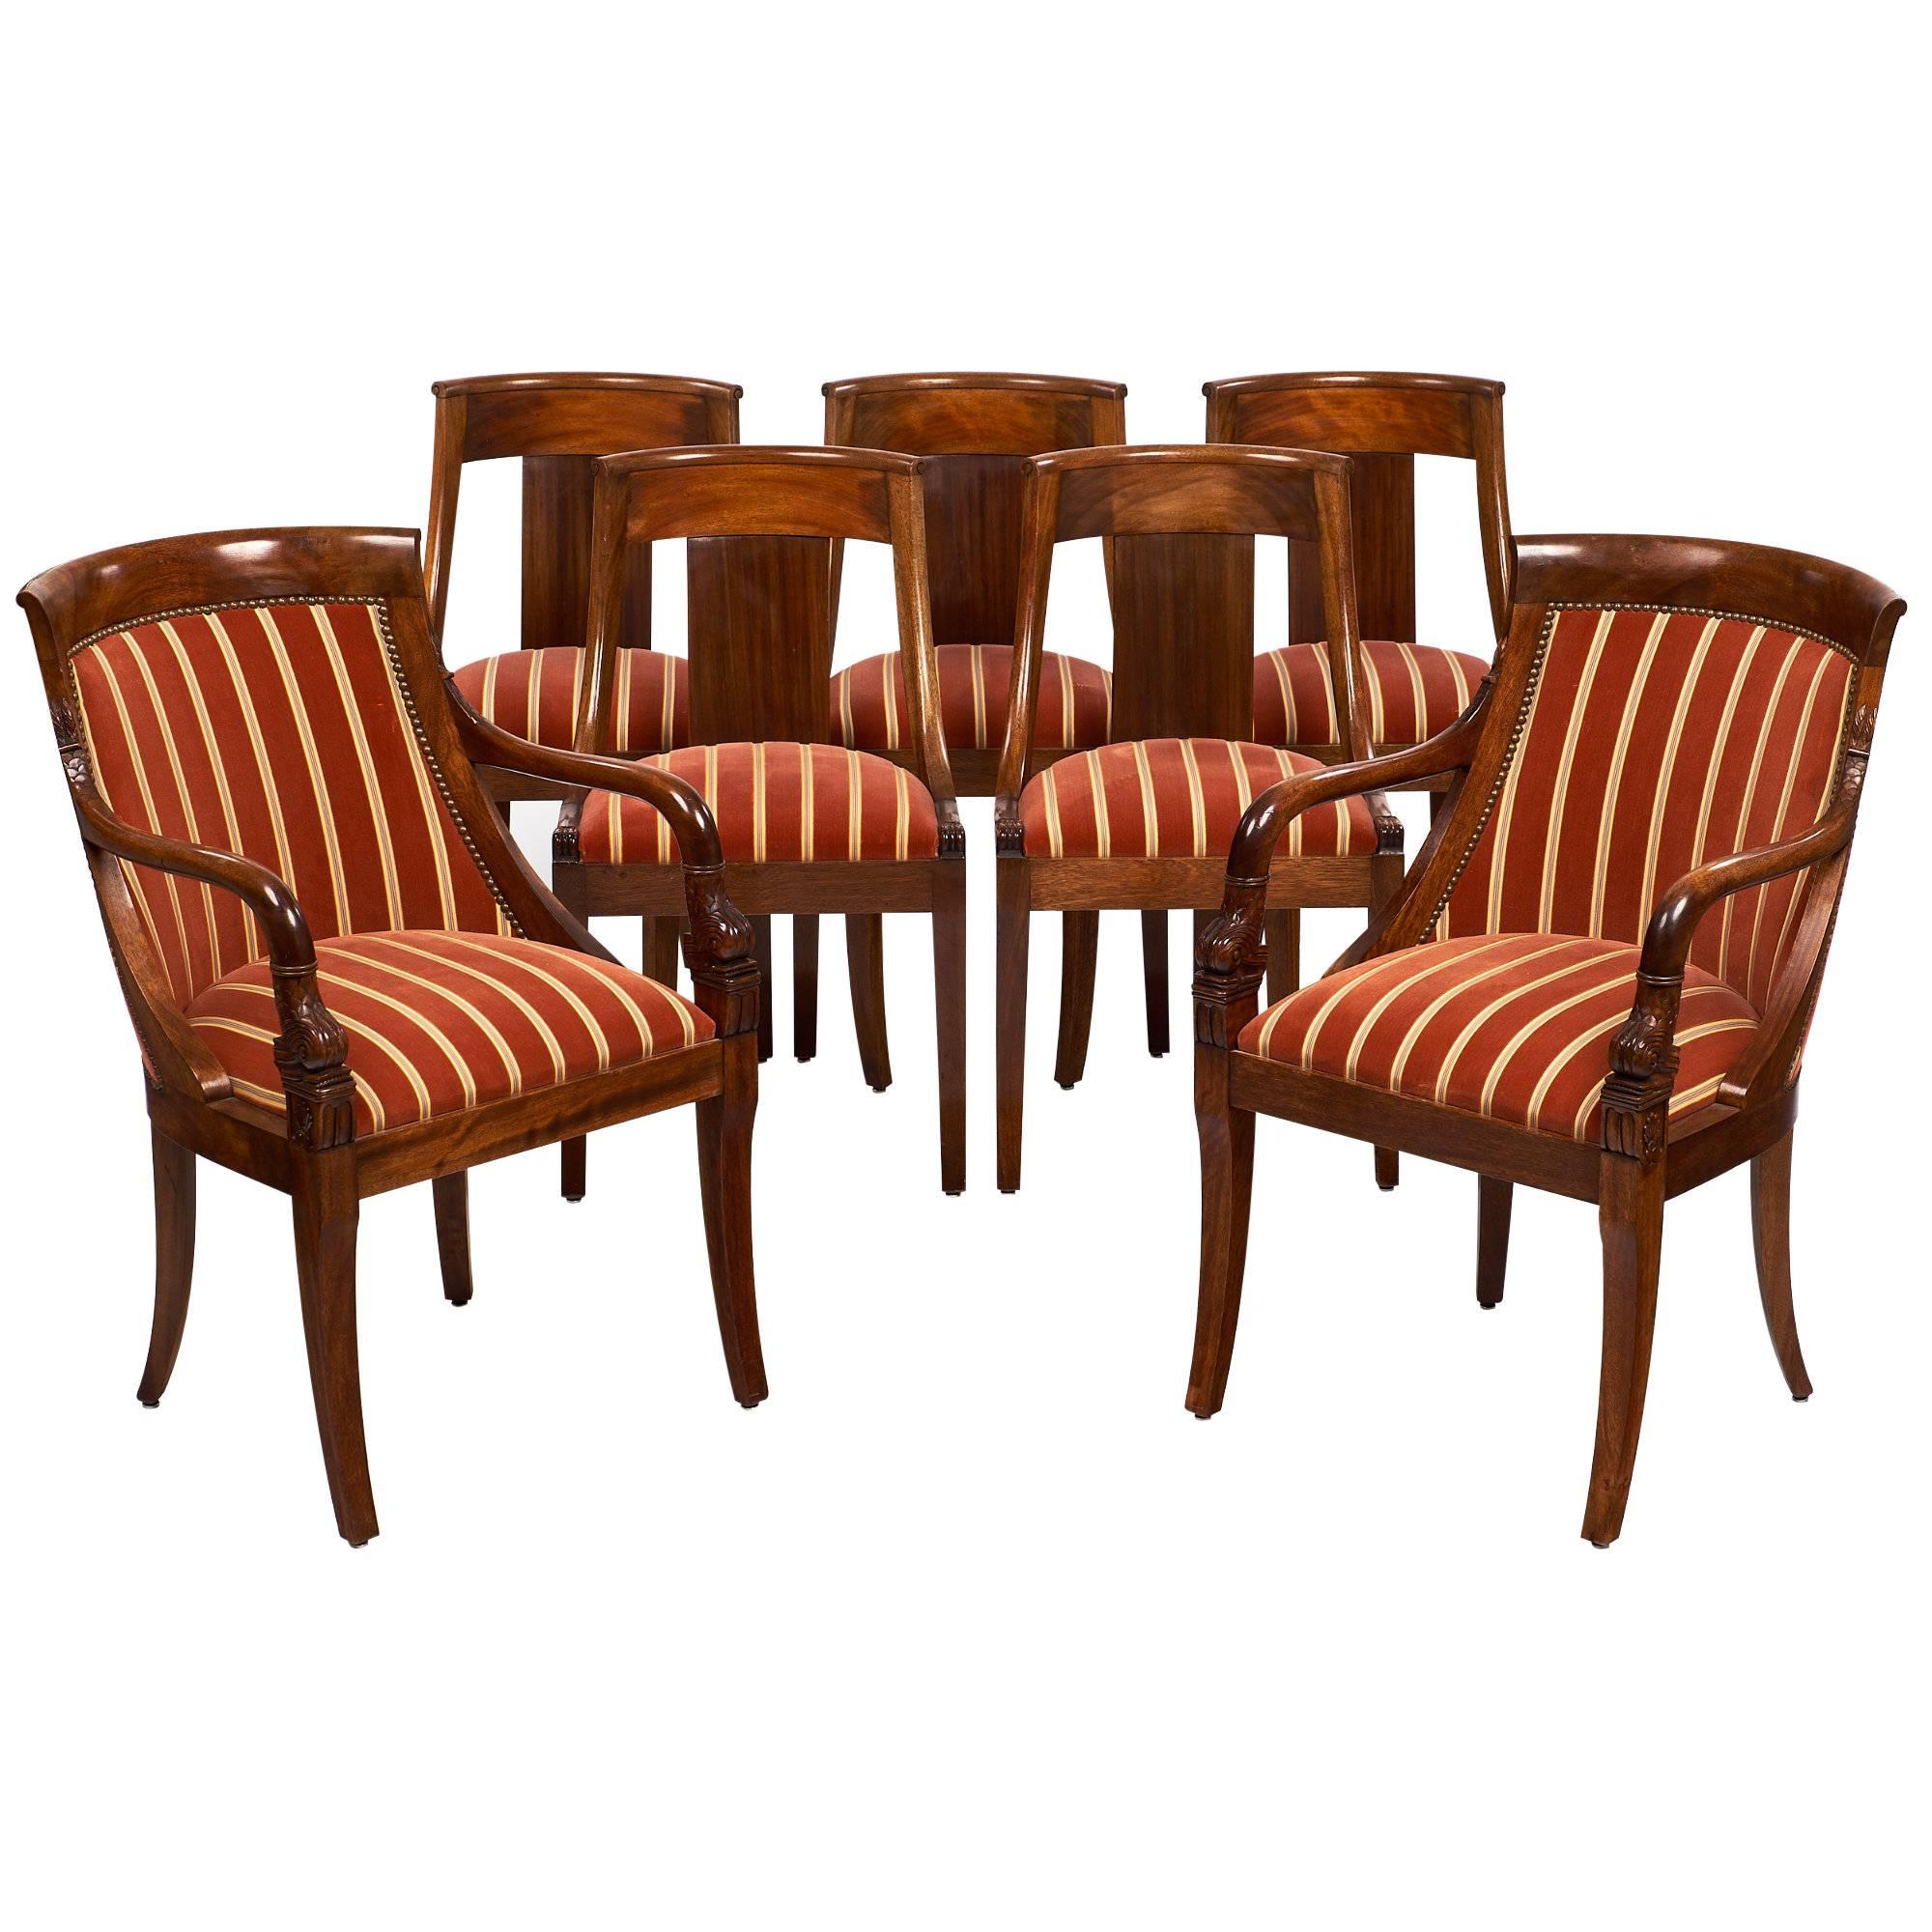 French Antique Empire Style Chairs